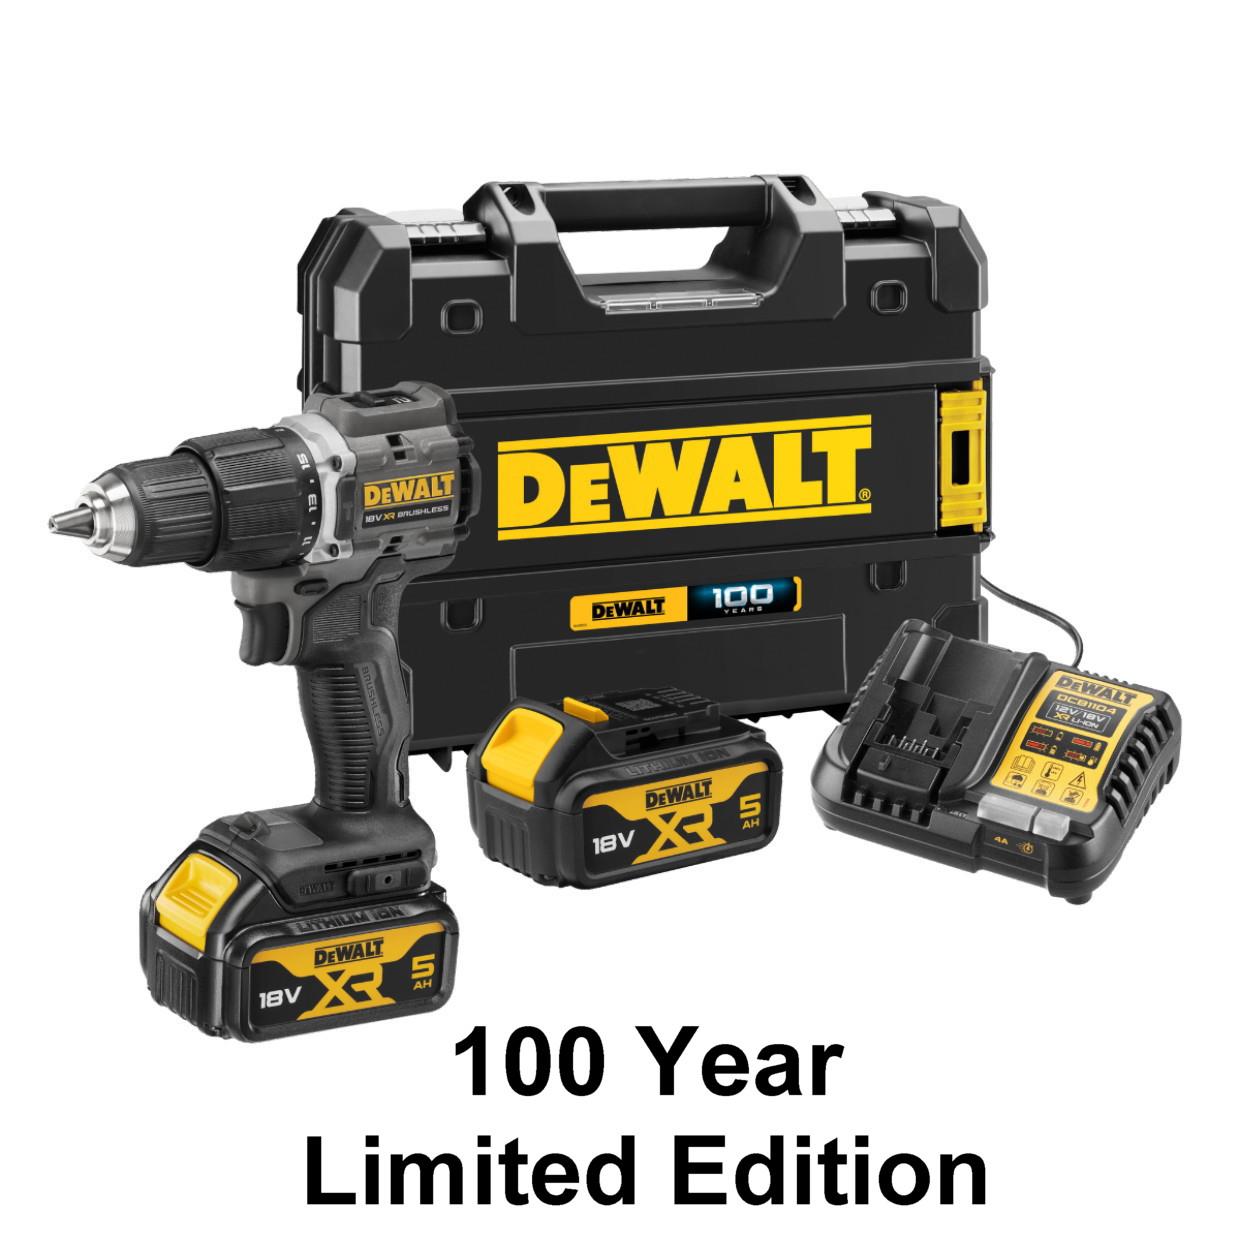 Dewalt DCD100P2T 100 Year Limited Edition Brushless Compact Combi Drill; 18 Volt; Complete With 2 x 5.0Ah Batteries; Charger; In 100 Year T-Stak Case